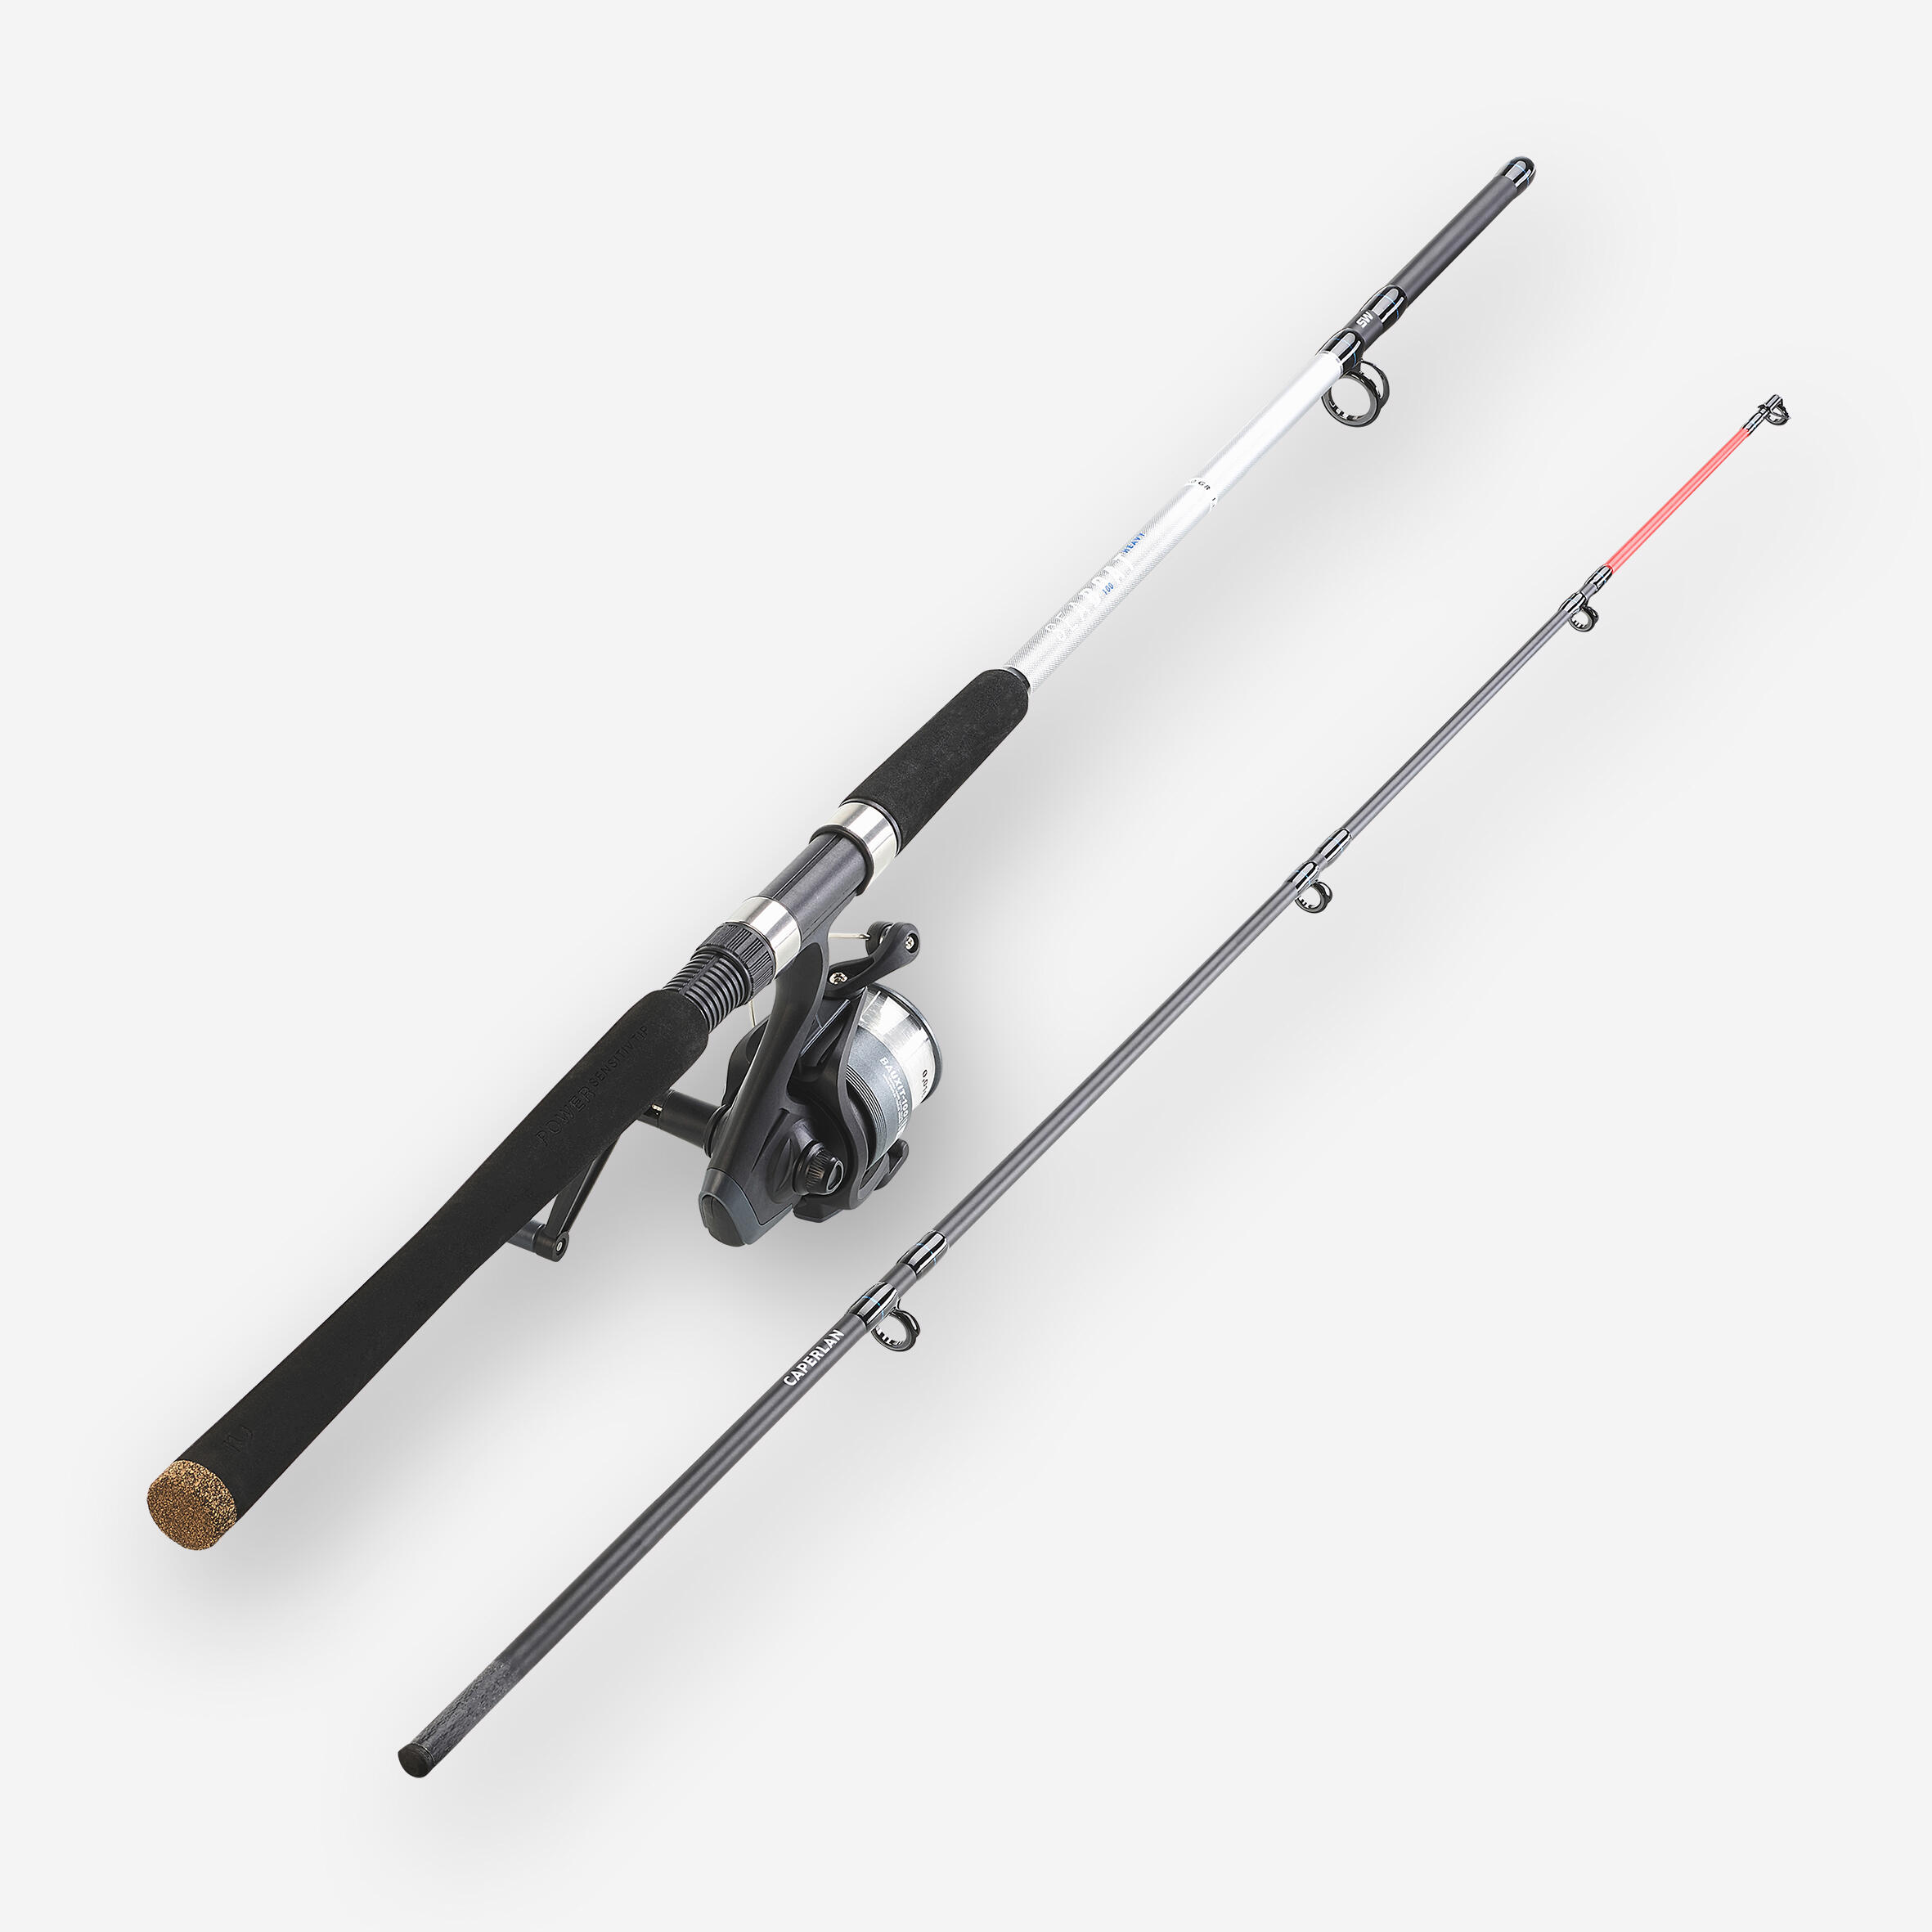  Fishing Rods - Shimano / Fishing Rods / Fishing Rods &  Accessories: Sports & Outdoors